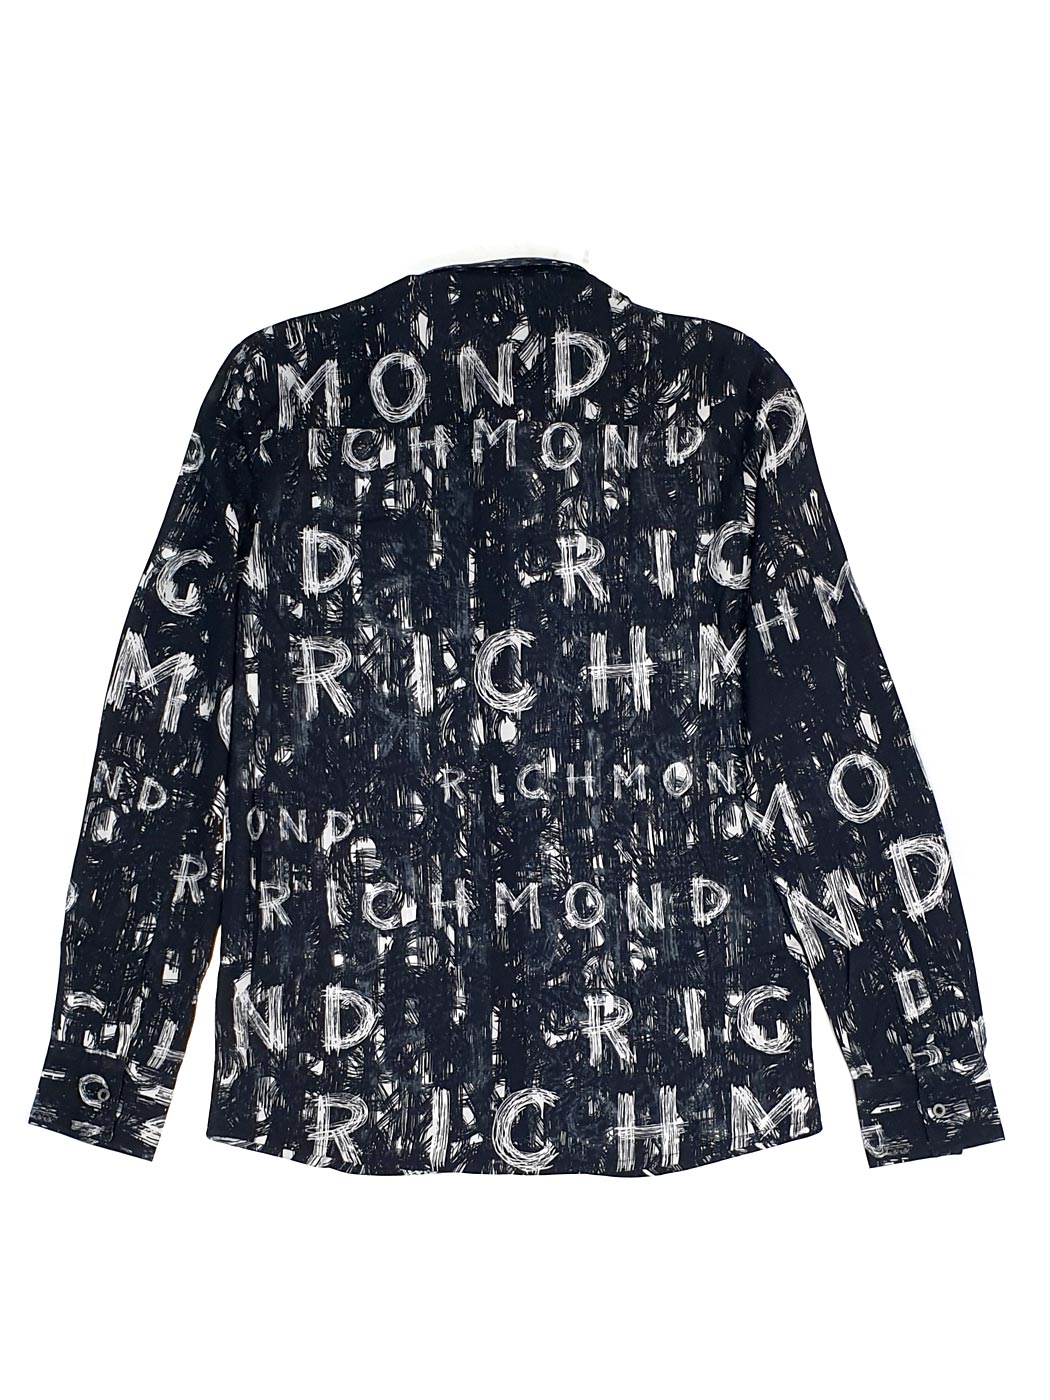 John Richmond shirt with all-over graphic print